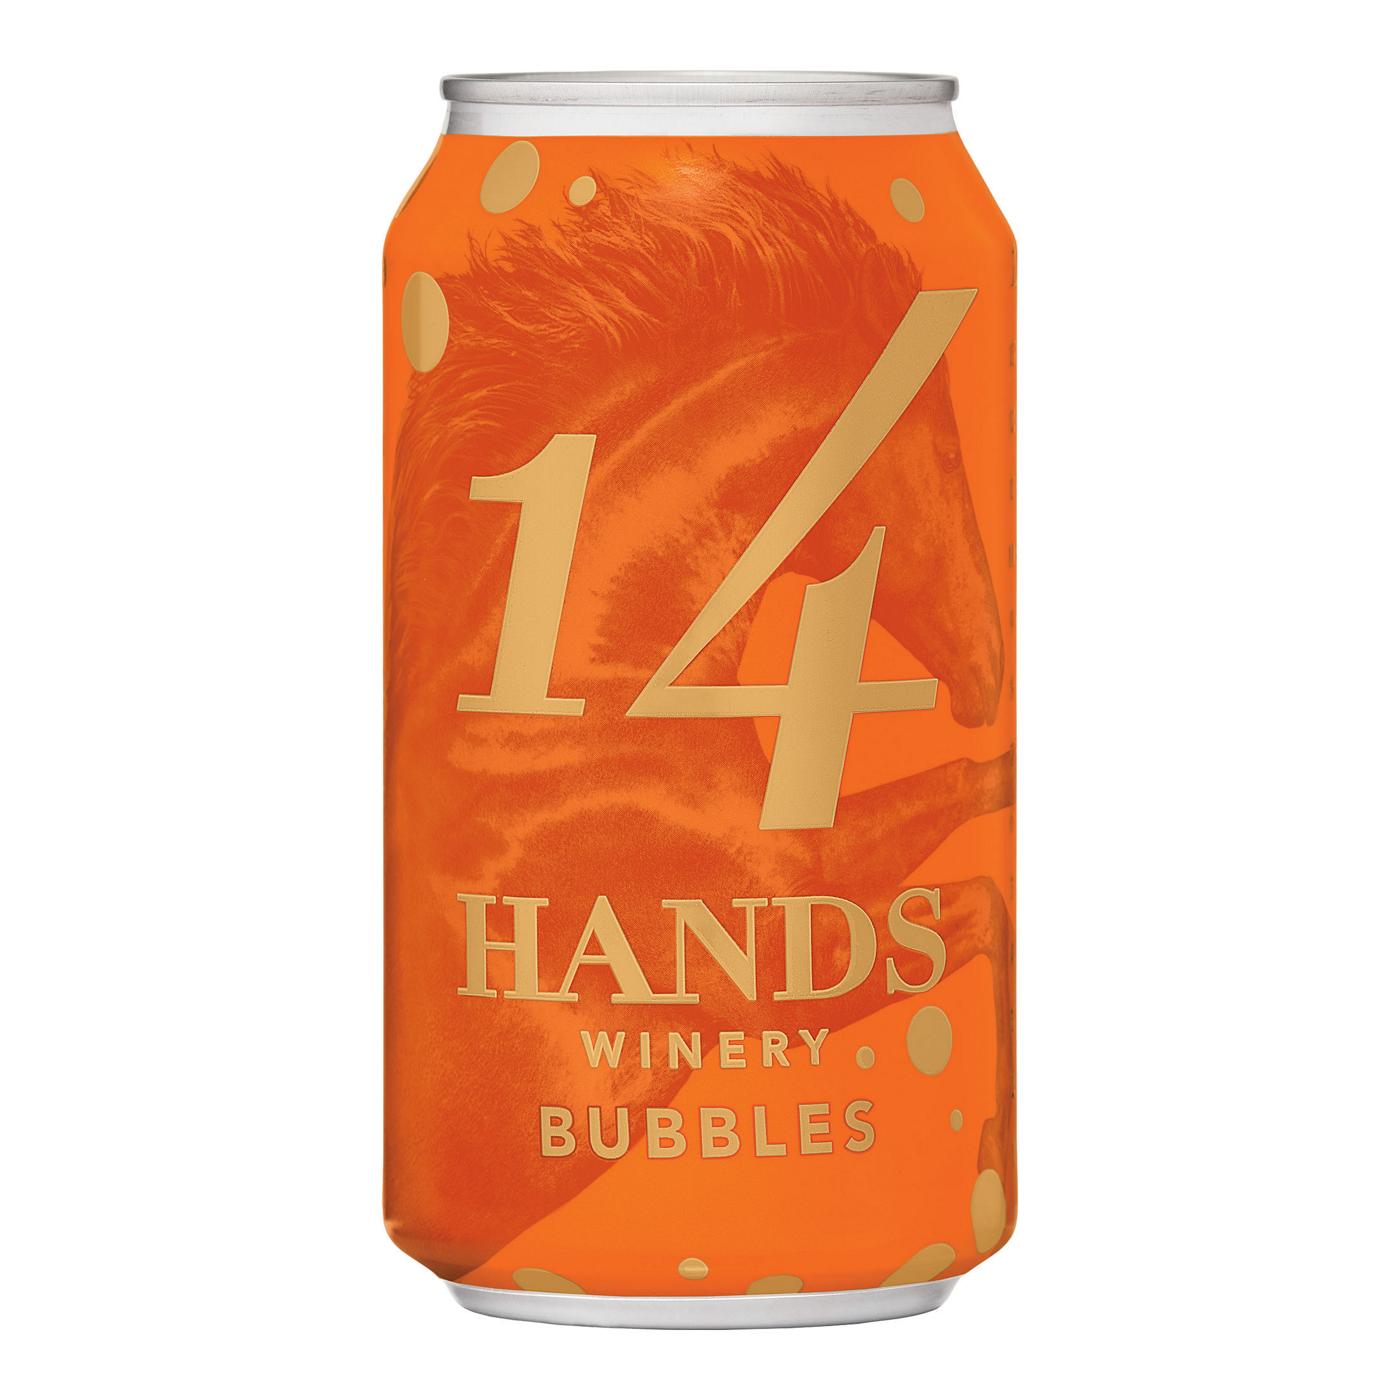 14 Hands Bubbles White Sparkling Wine; image 1 of 5